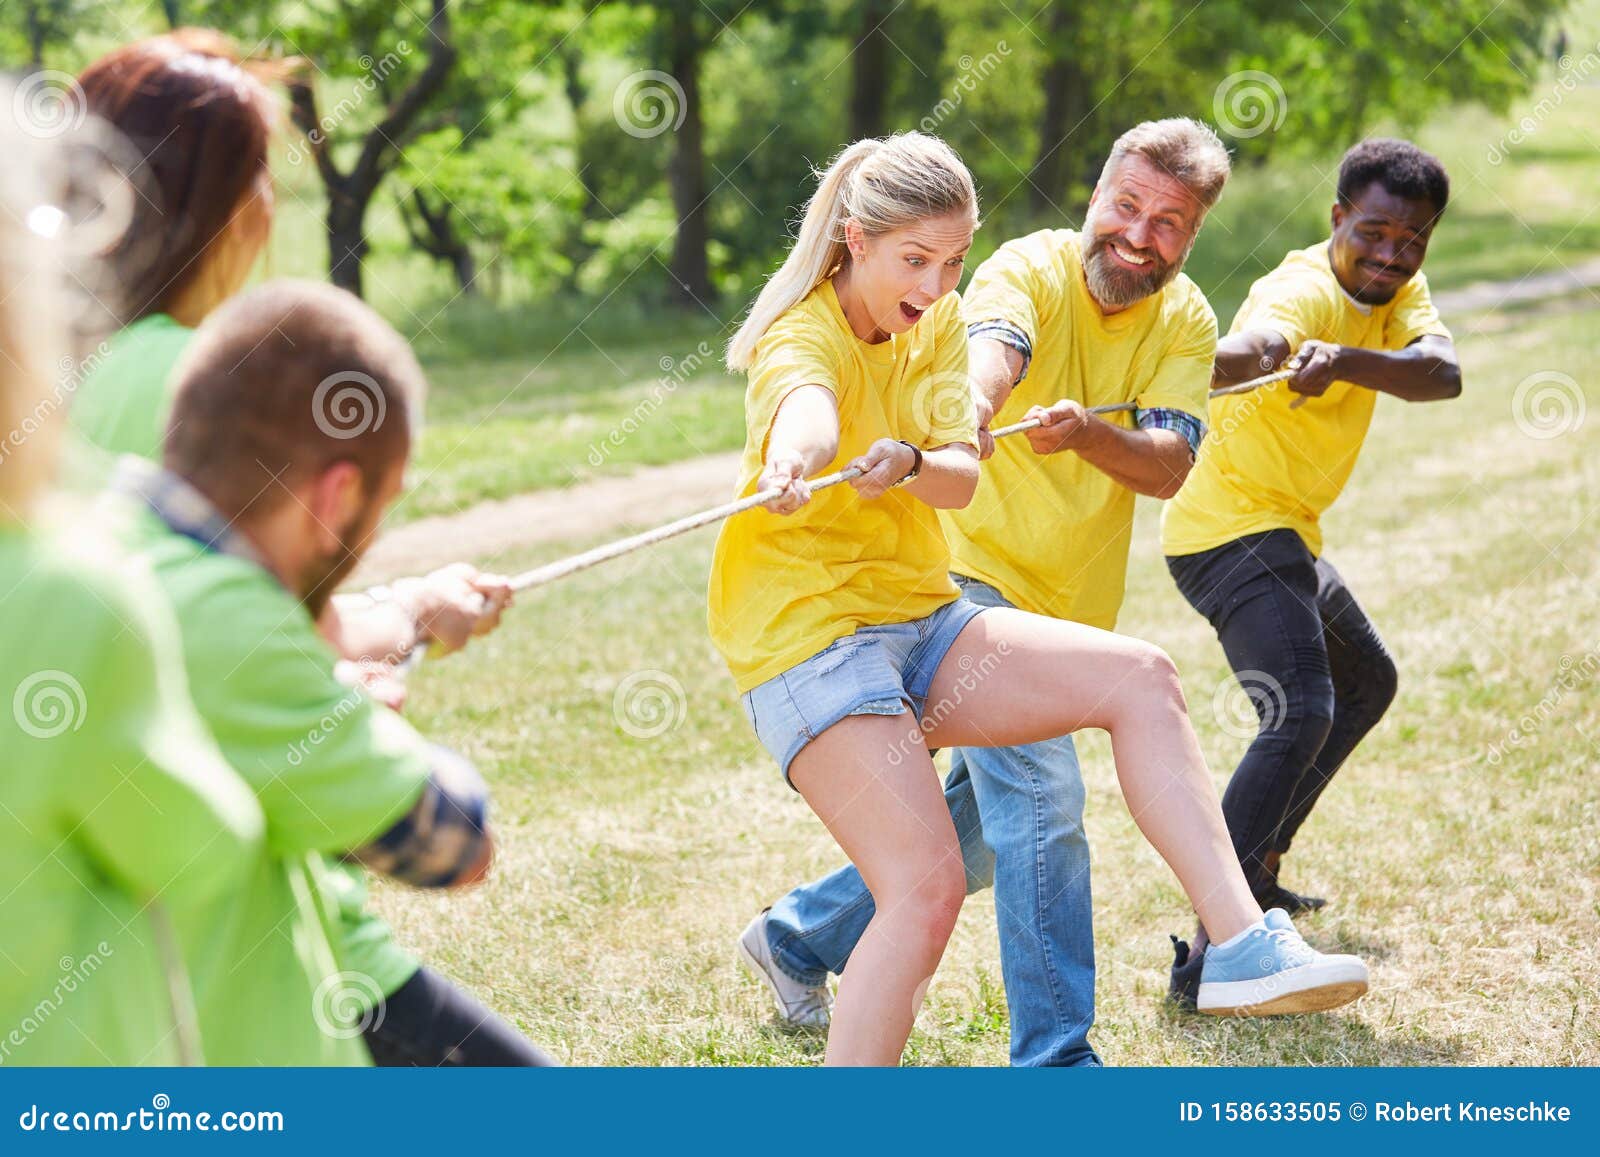 Team in Tug of War As Teambuilding Exercise Stock Image - Image of ...